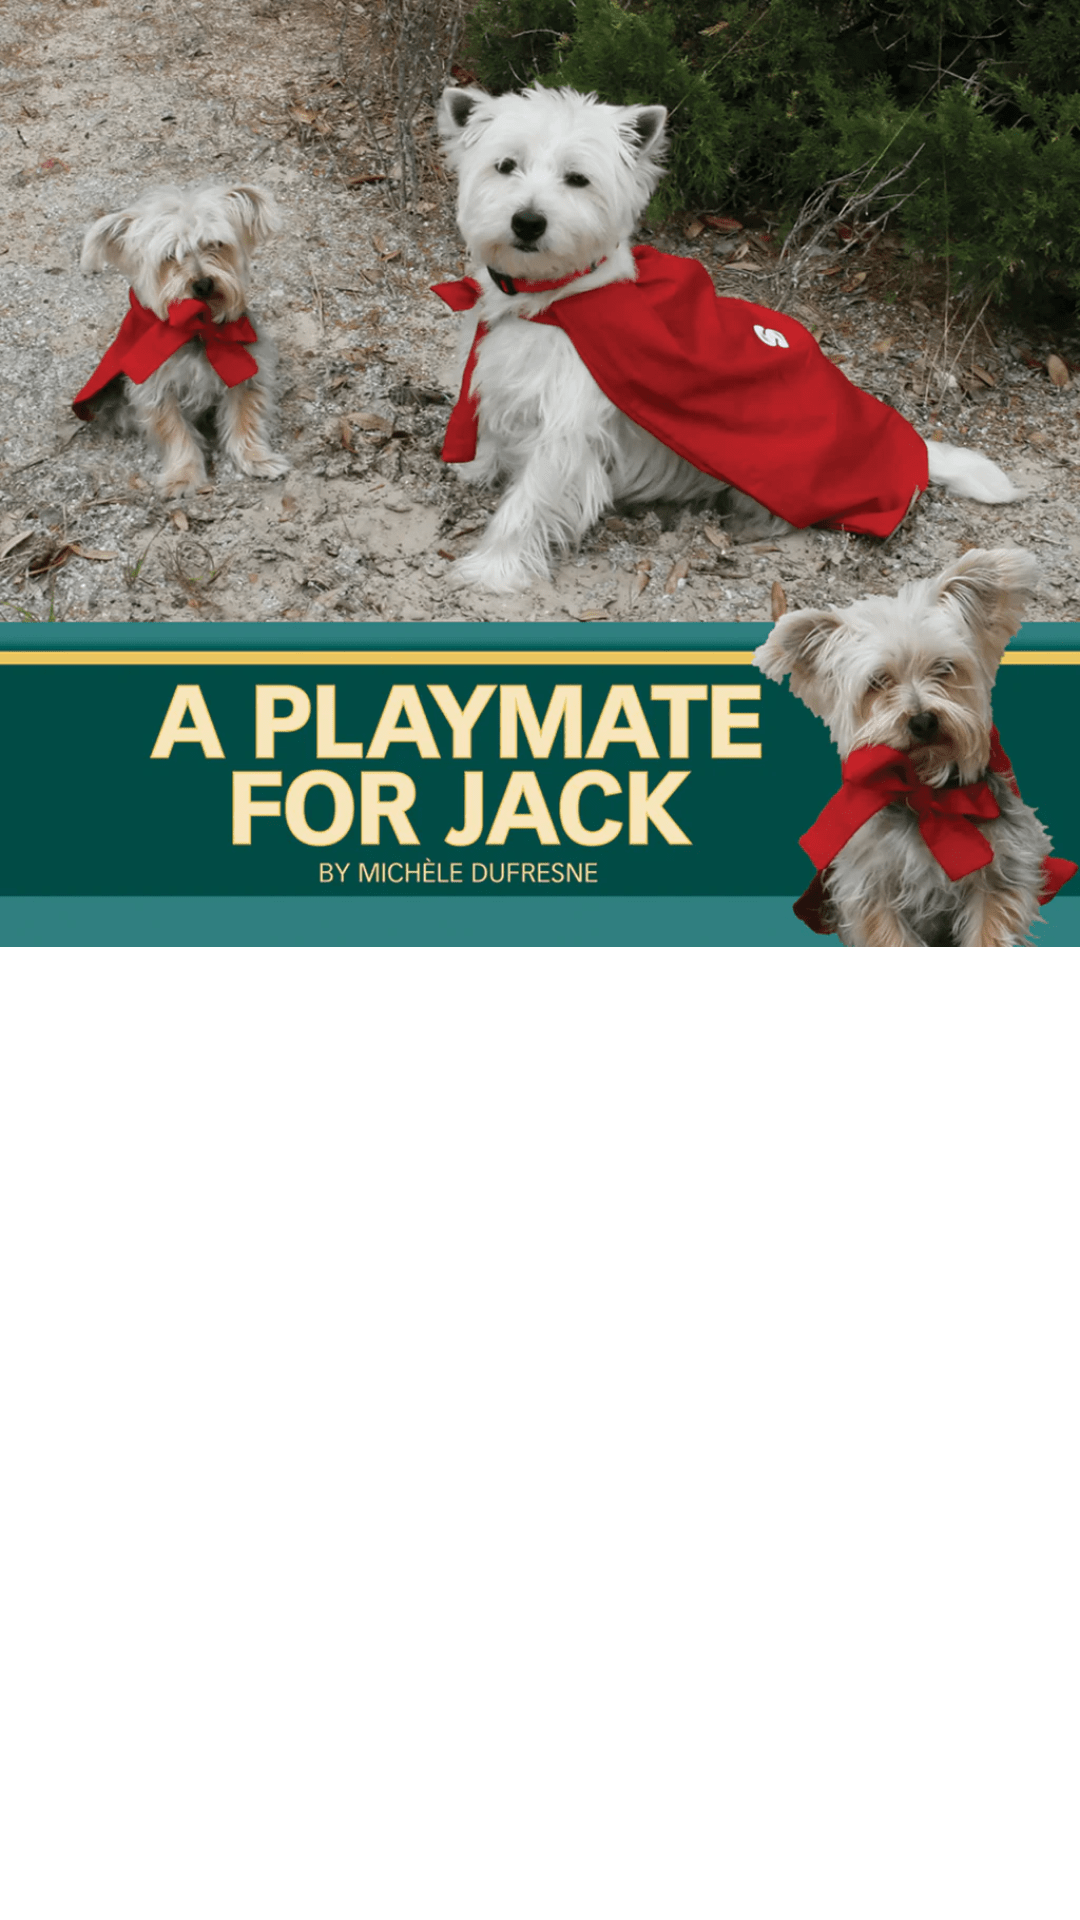 A Playmate for Jack by Michele Dufresne